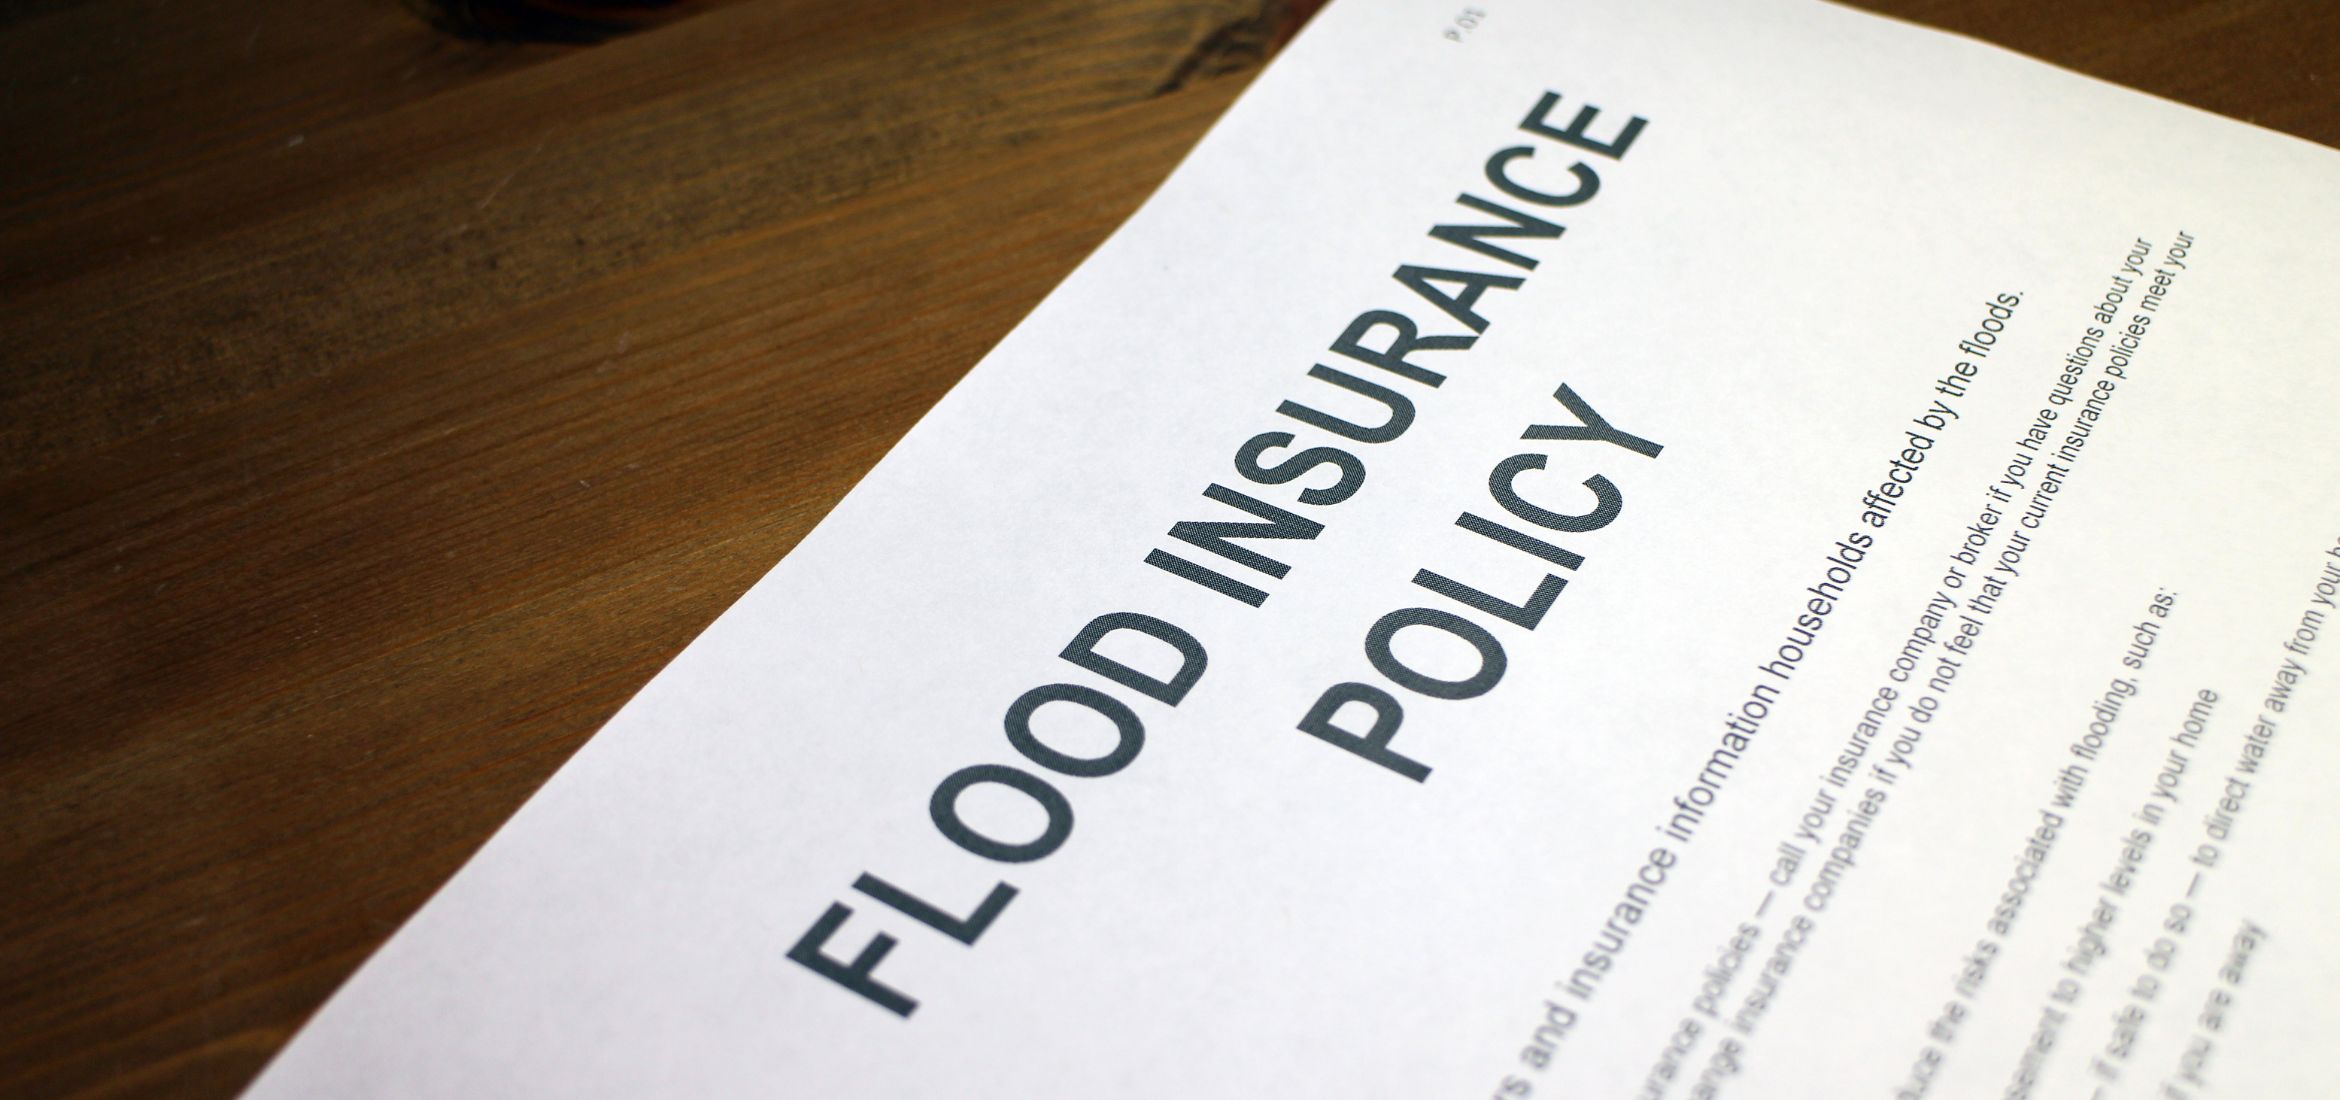 flood insurance policy